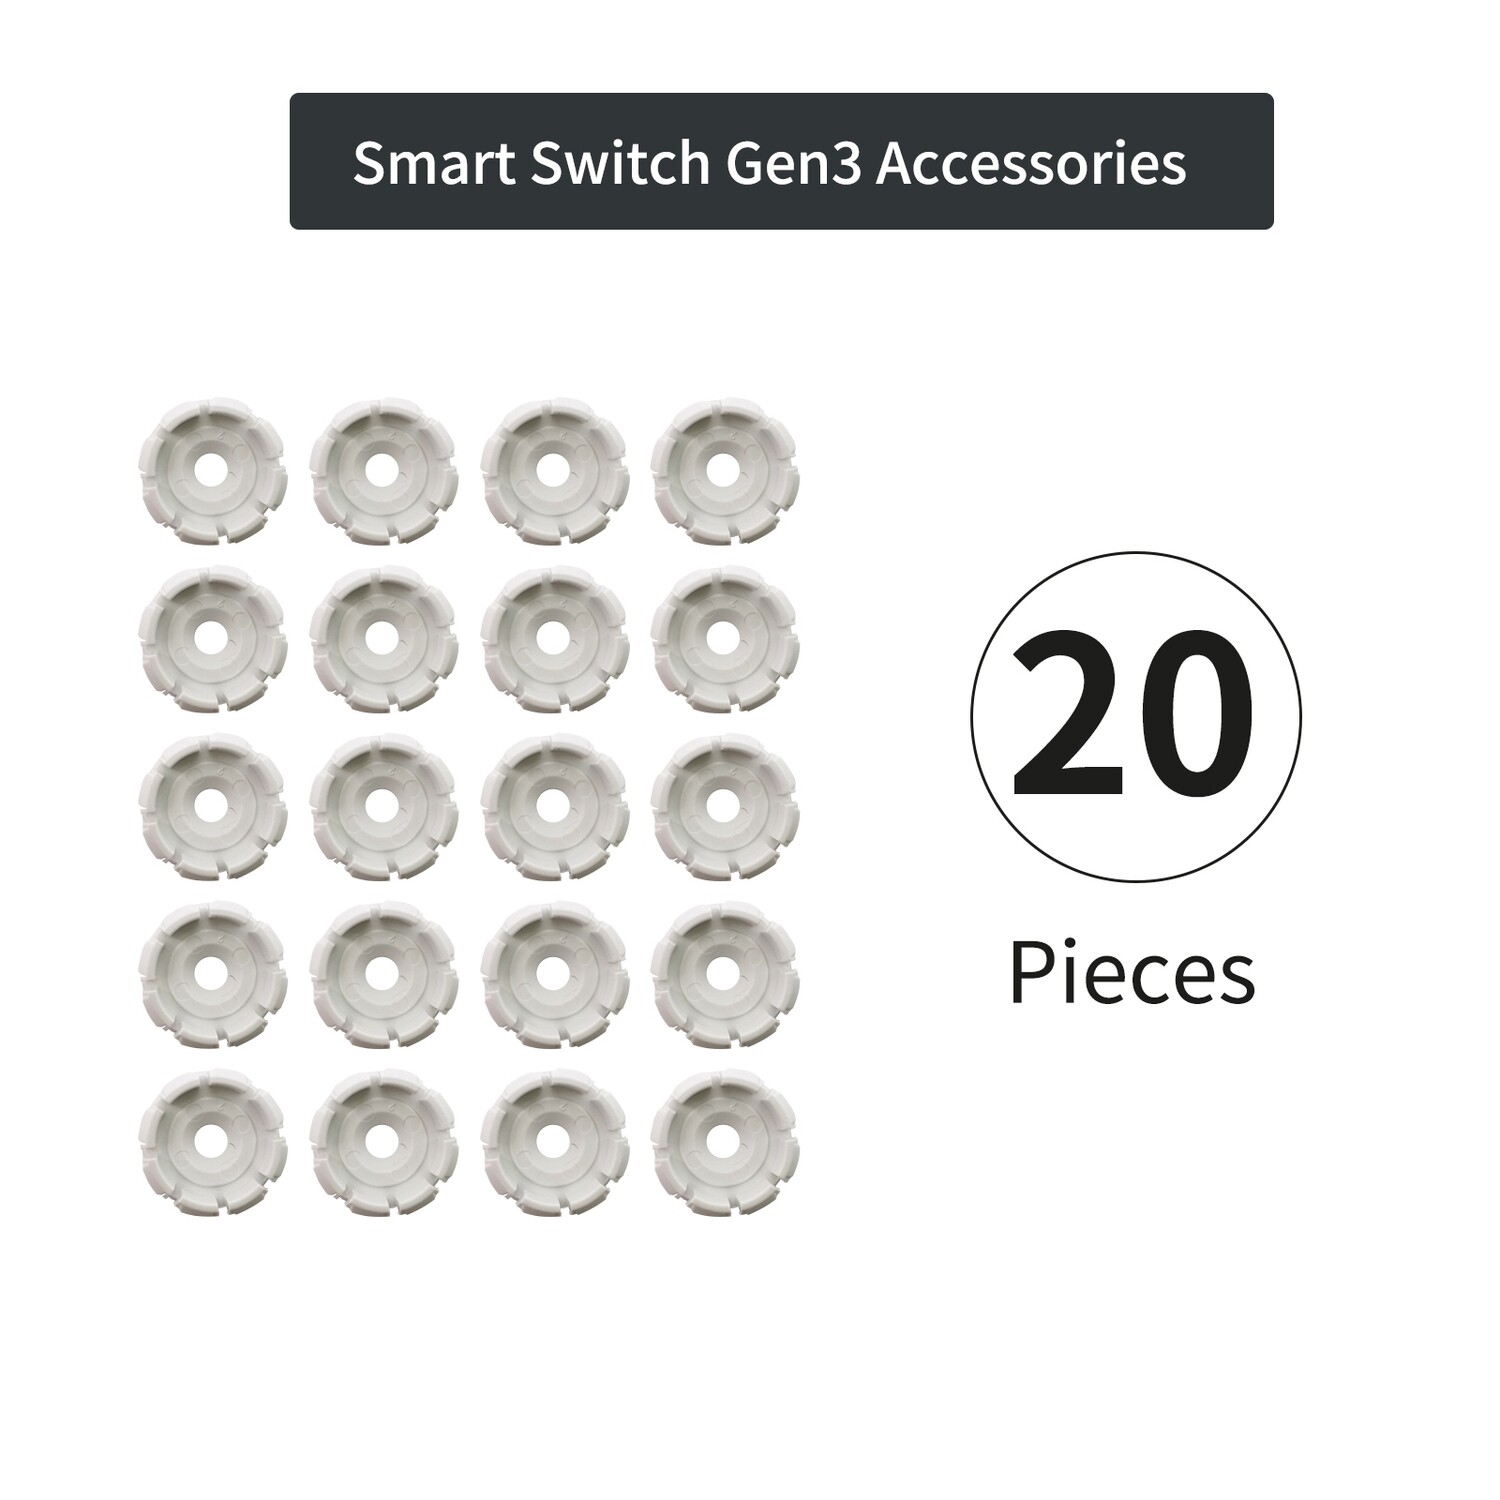 THIRDREALITY Fasteners, Smart Switch Gen3 Accessories, 20 Pieces